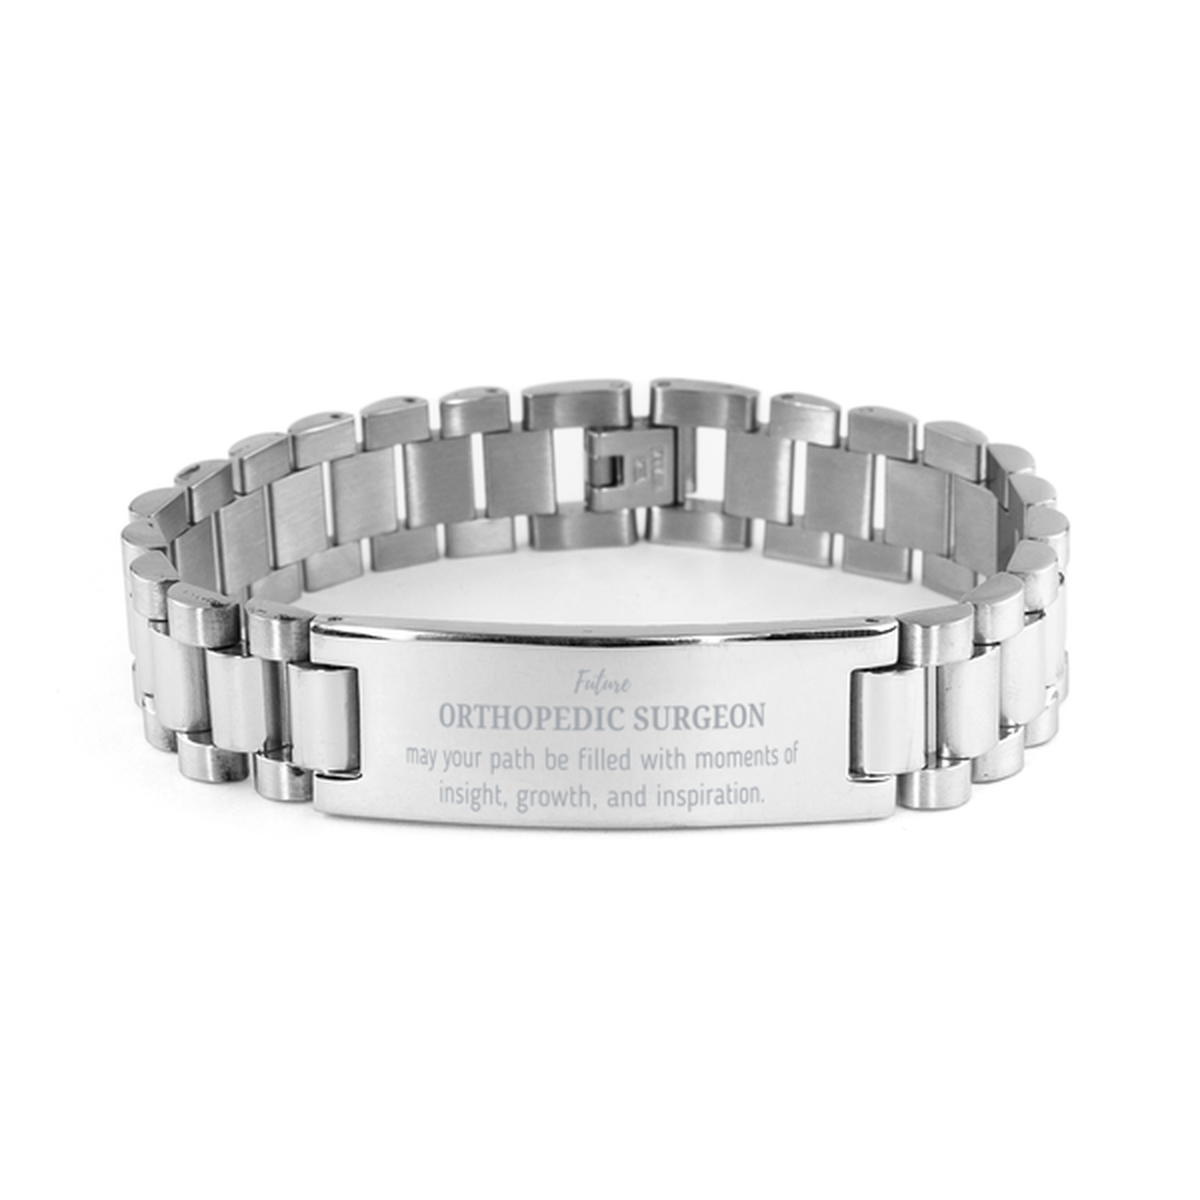 Future Orthopedic Surgeon Gifts, May your path be filled with moments of insight, Graduation Gifts for New Orthopedic Surgeon, Christmas Unique Ladder Stainless Steel Bracelet For Men, Women, Friends